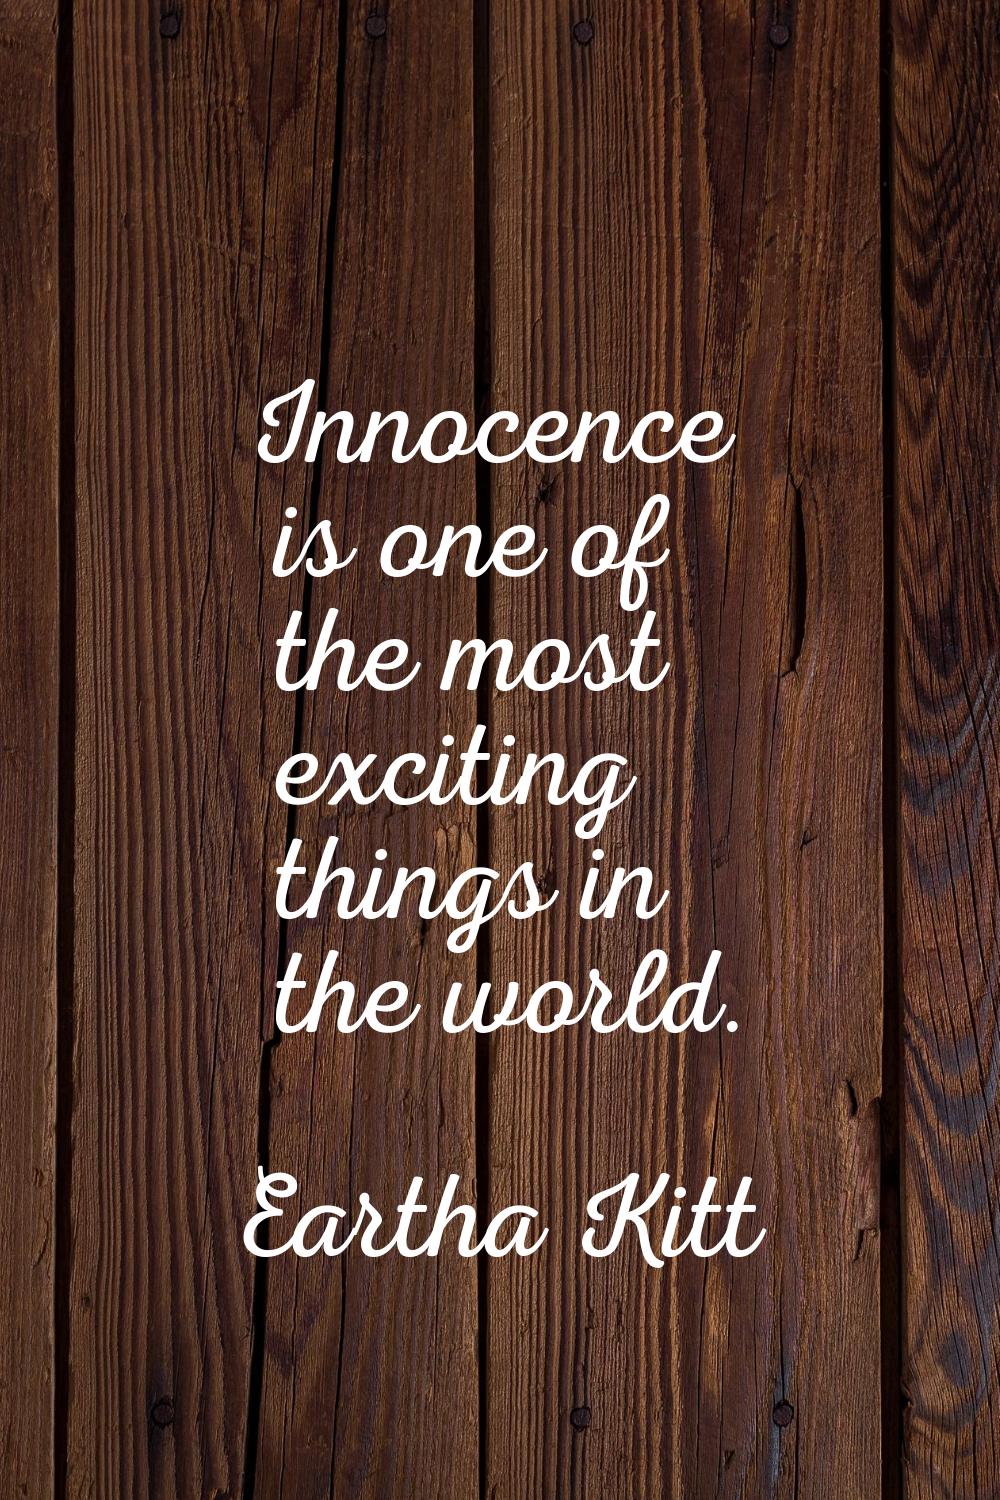 Innocence is one of the most exciting things in the world.